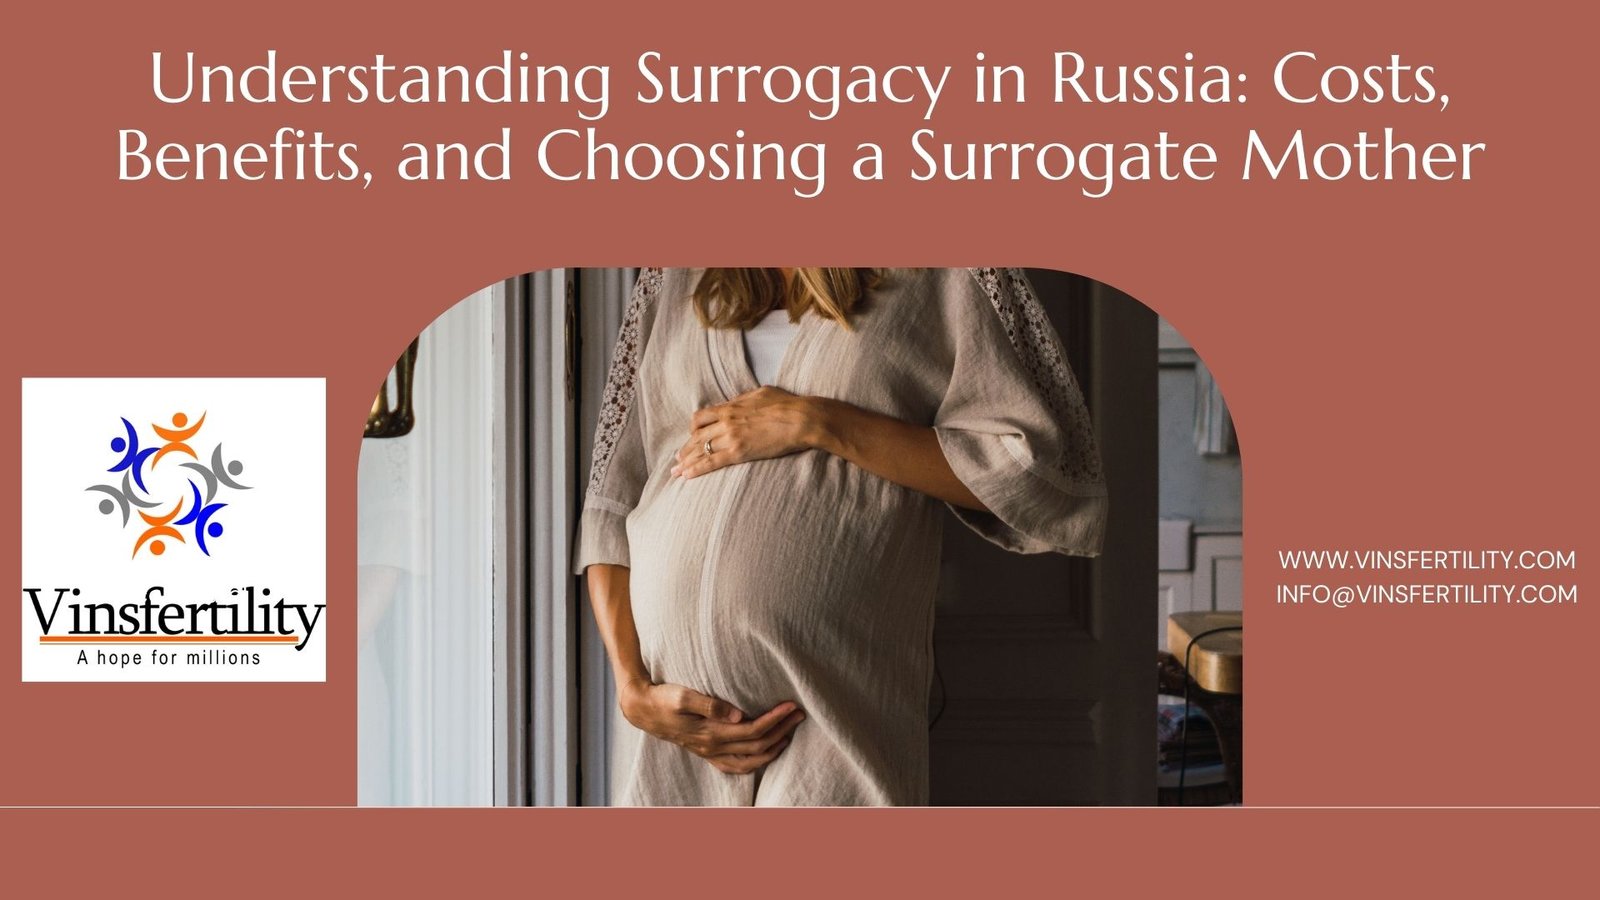 SURROGACY IN RUSSIA